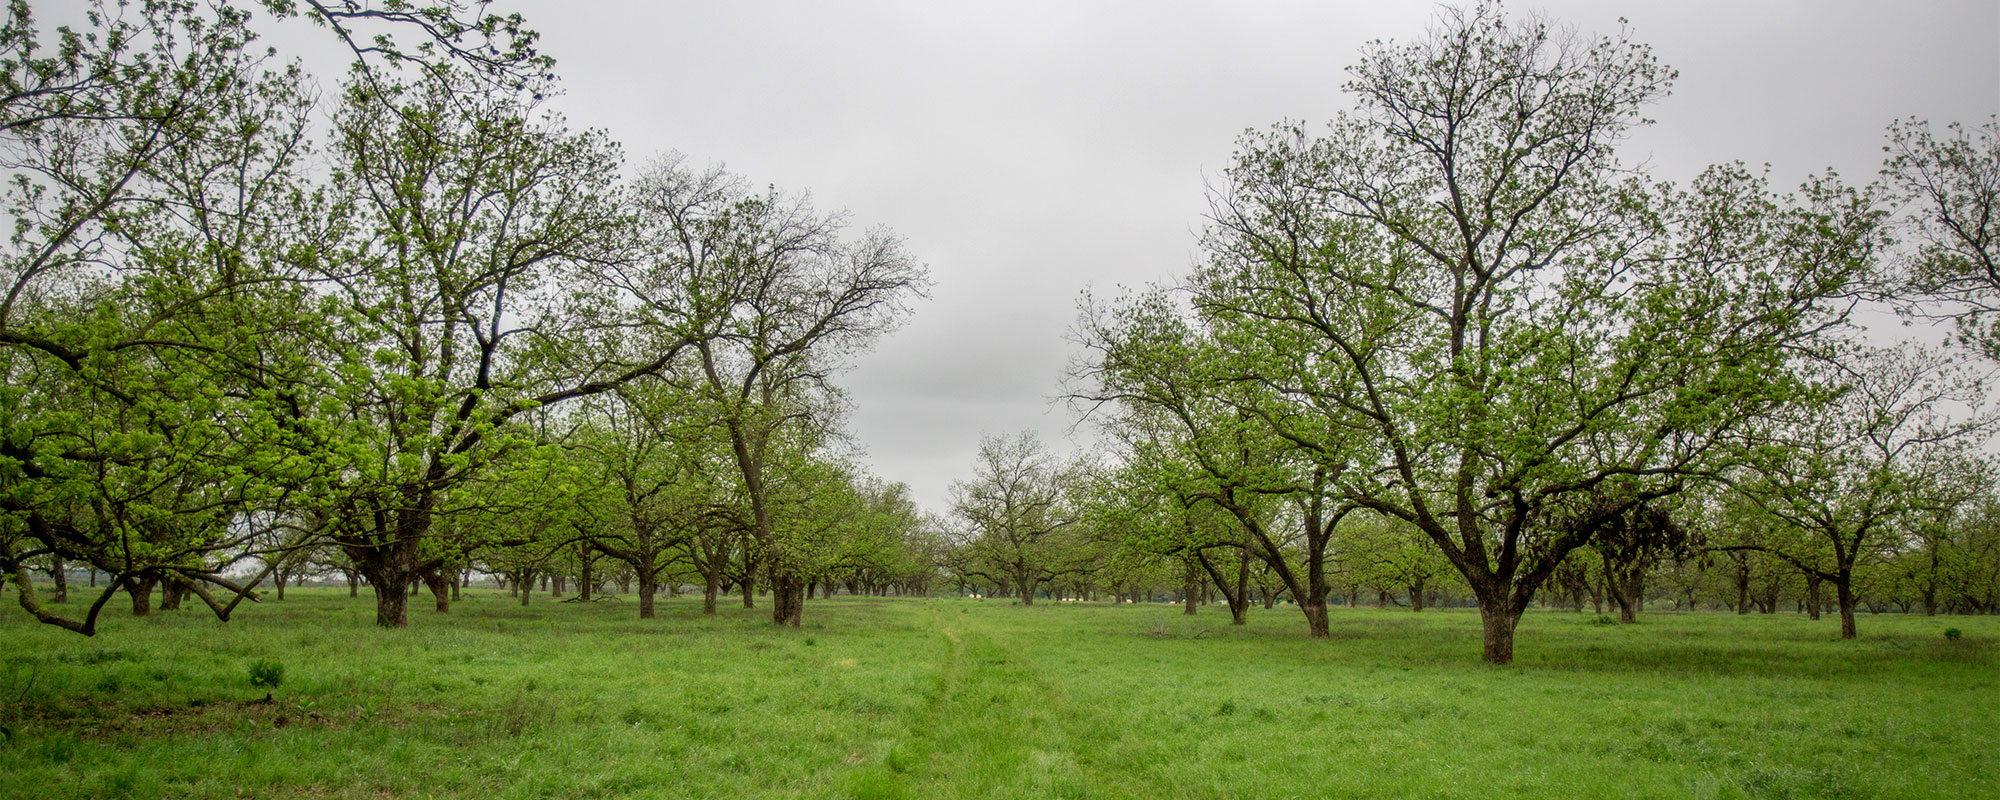 Pecan orchard with green grass under a cloudy sky.